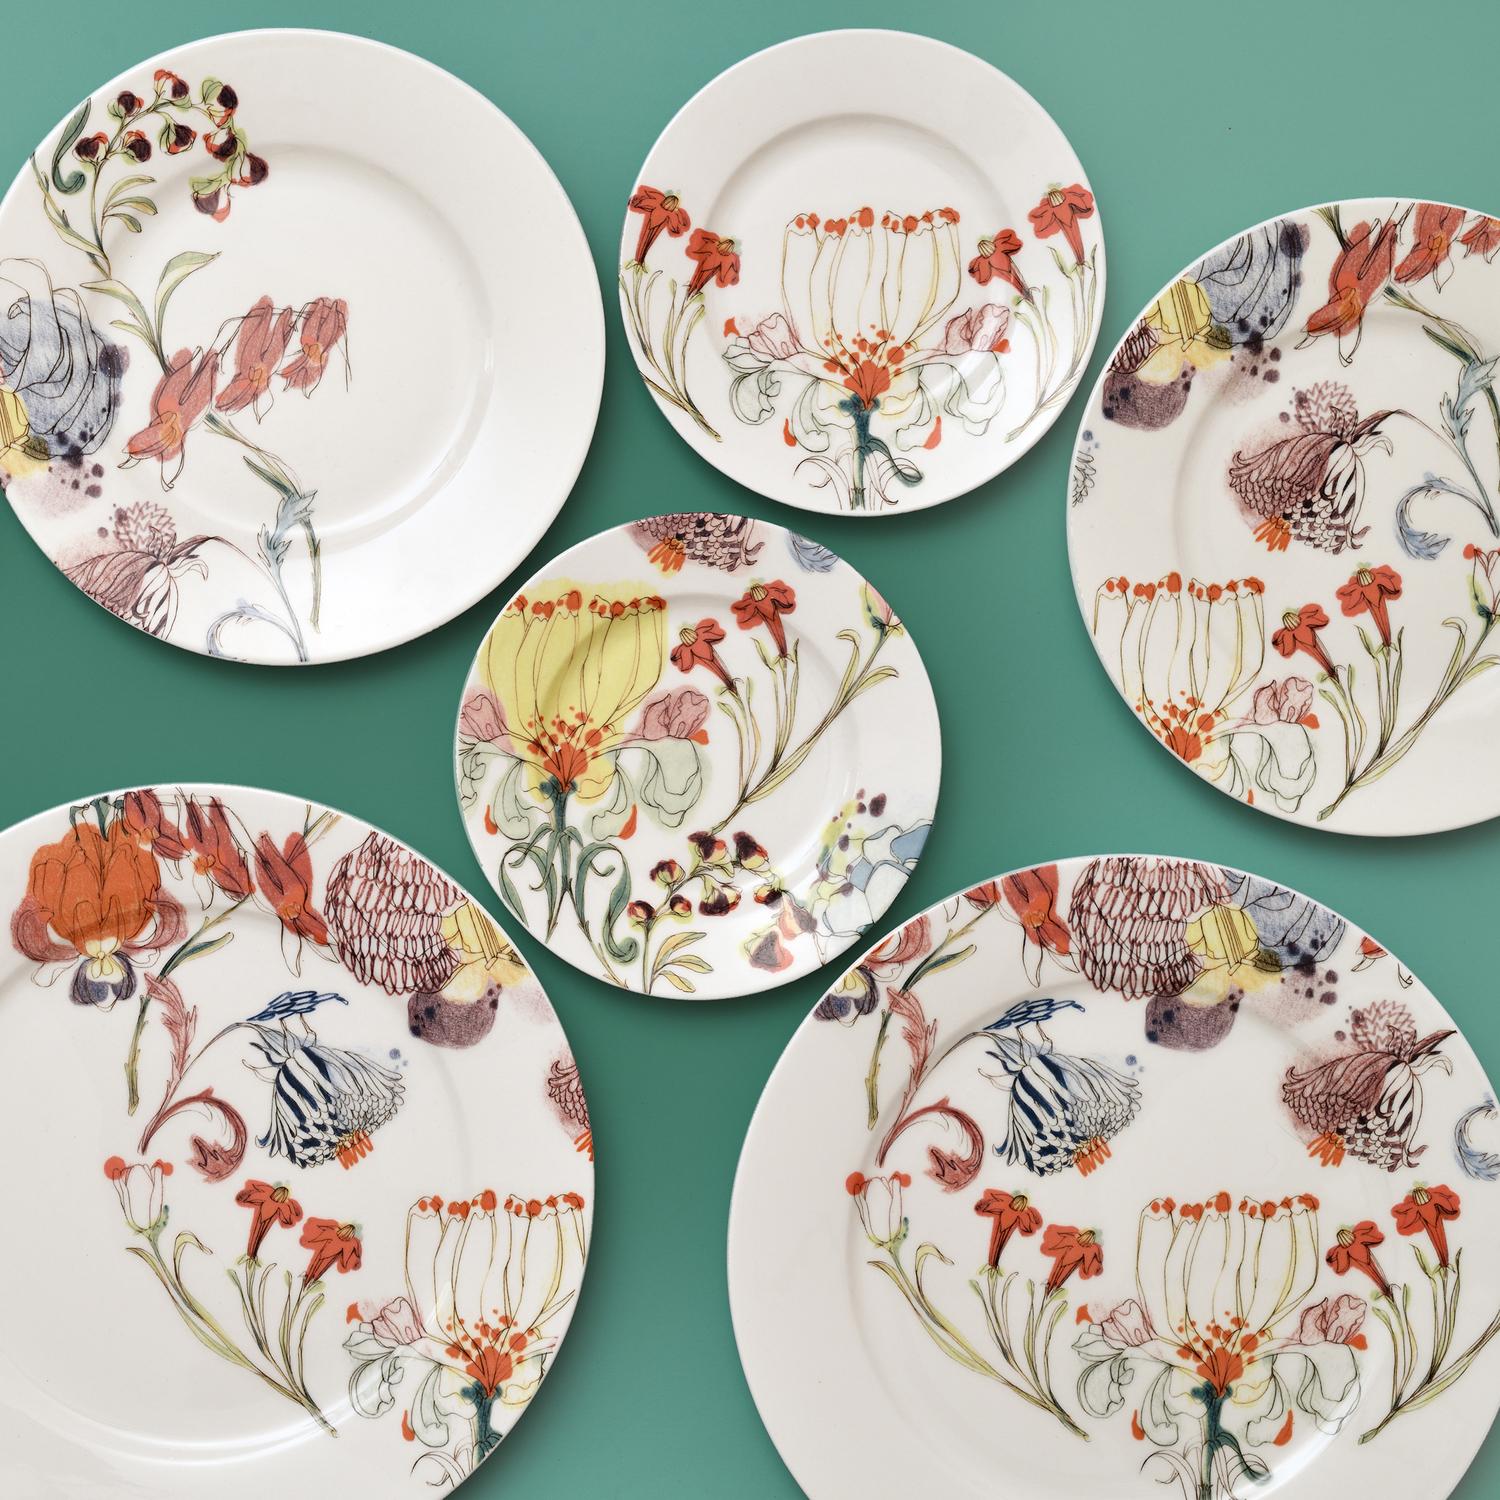 Collection plate. Plate collection. Hand painted Porcelain Kitchen Wares. Garden Plates Stones.